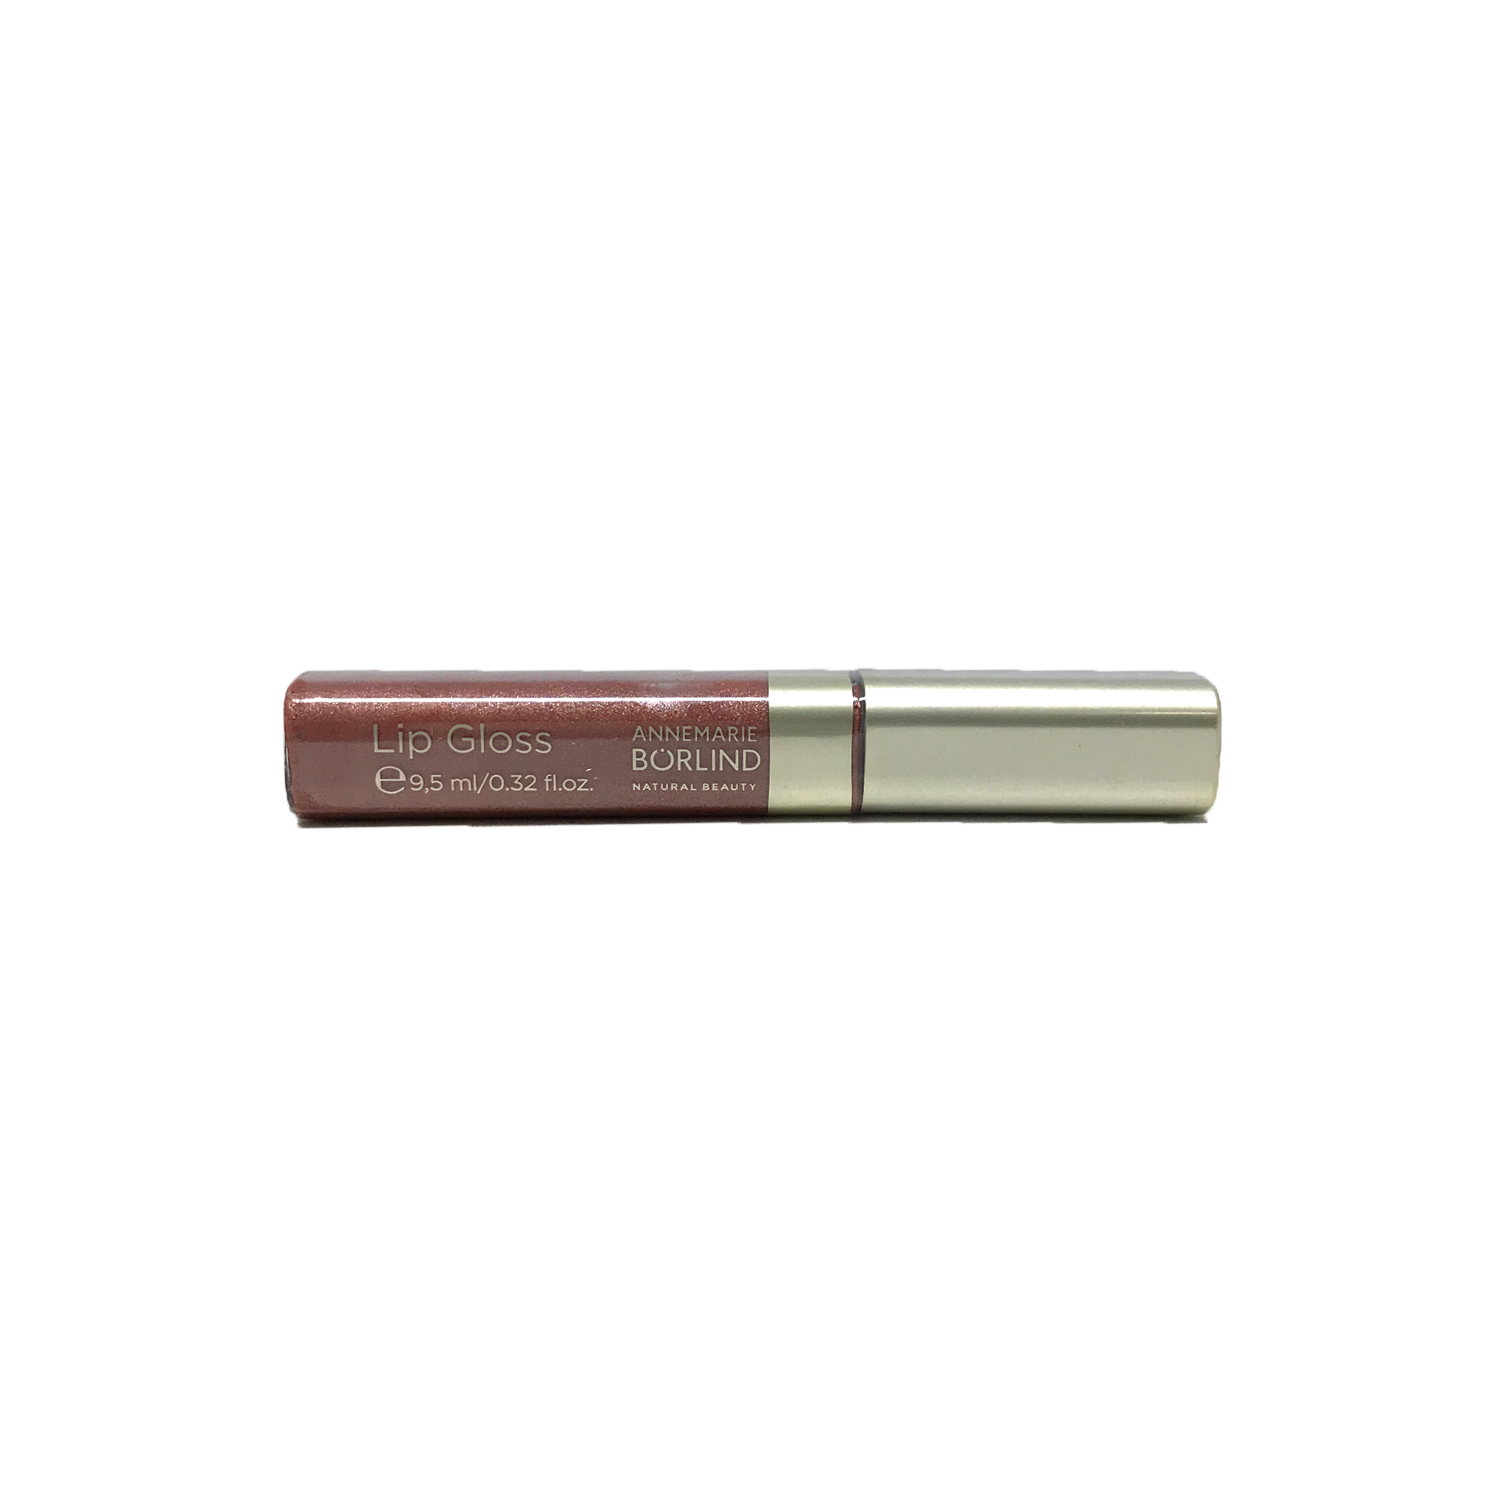 Annemarie Borlind Lip gloss Bronze 10ml (Discontinued- Replacement Coming Soon)